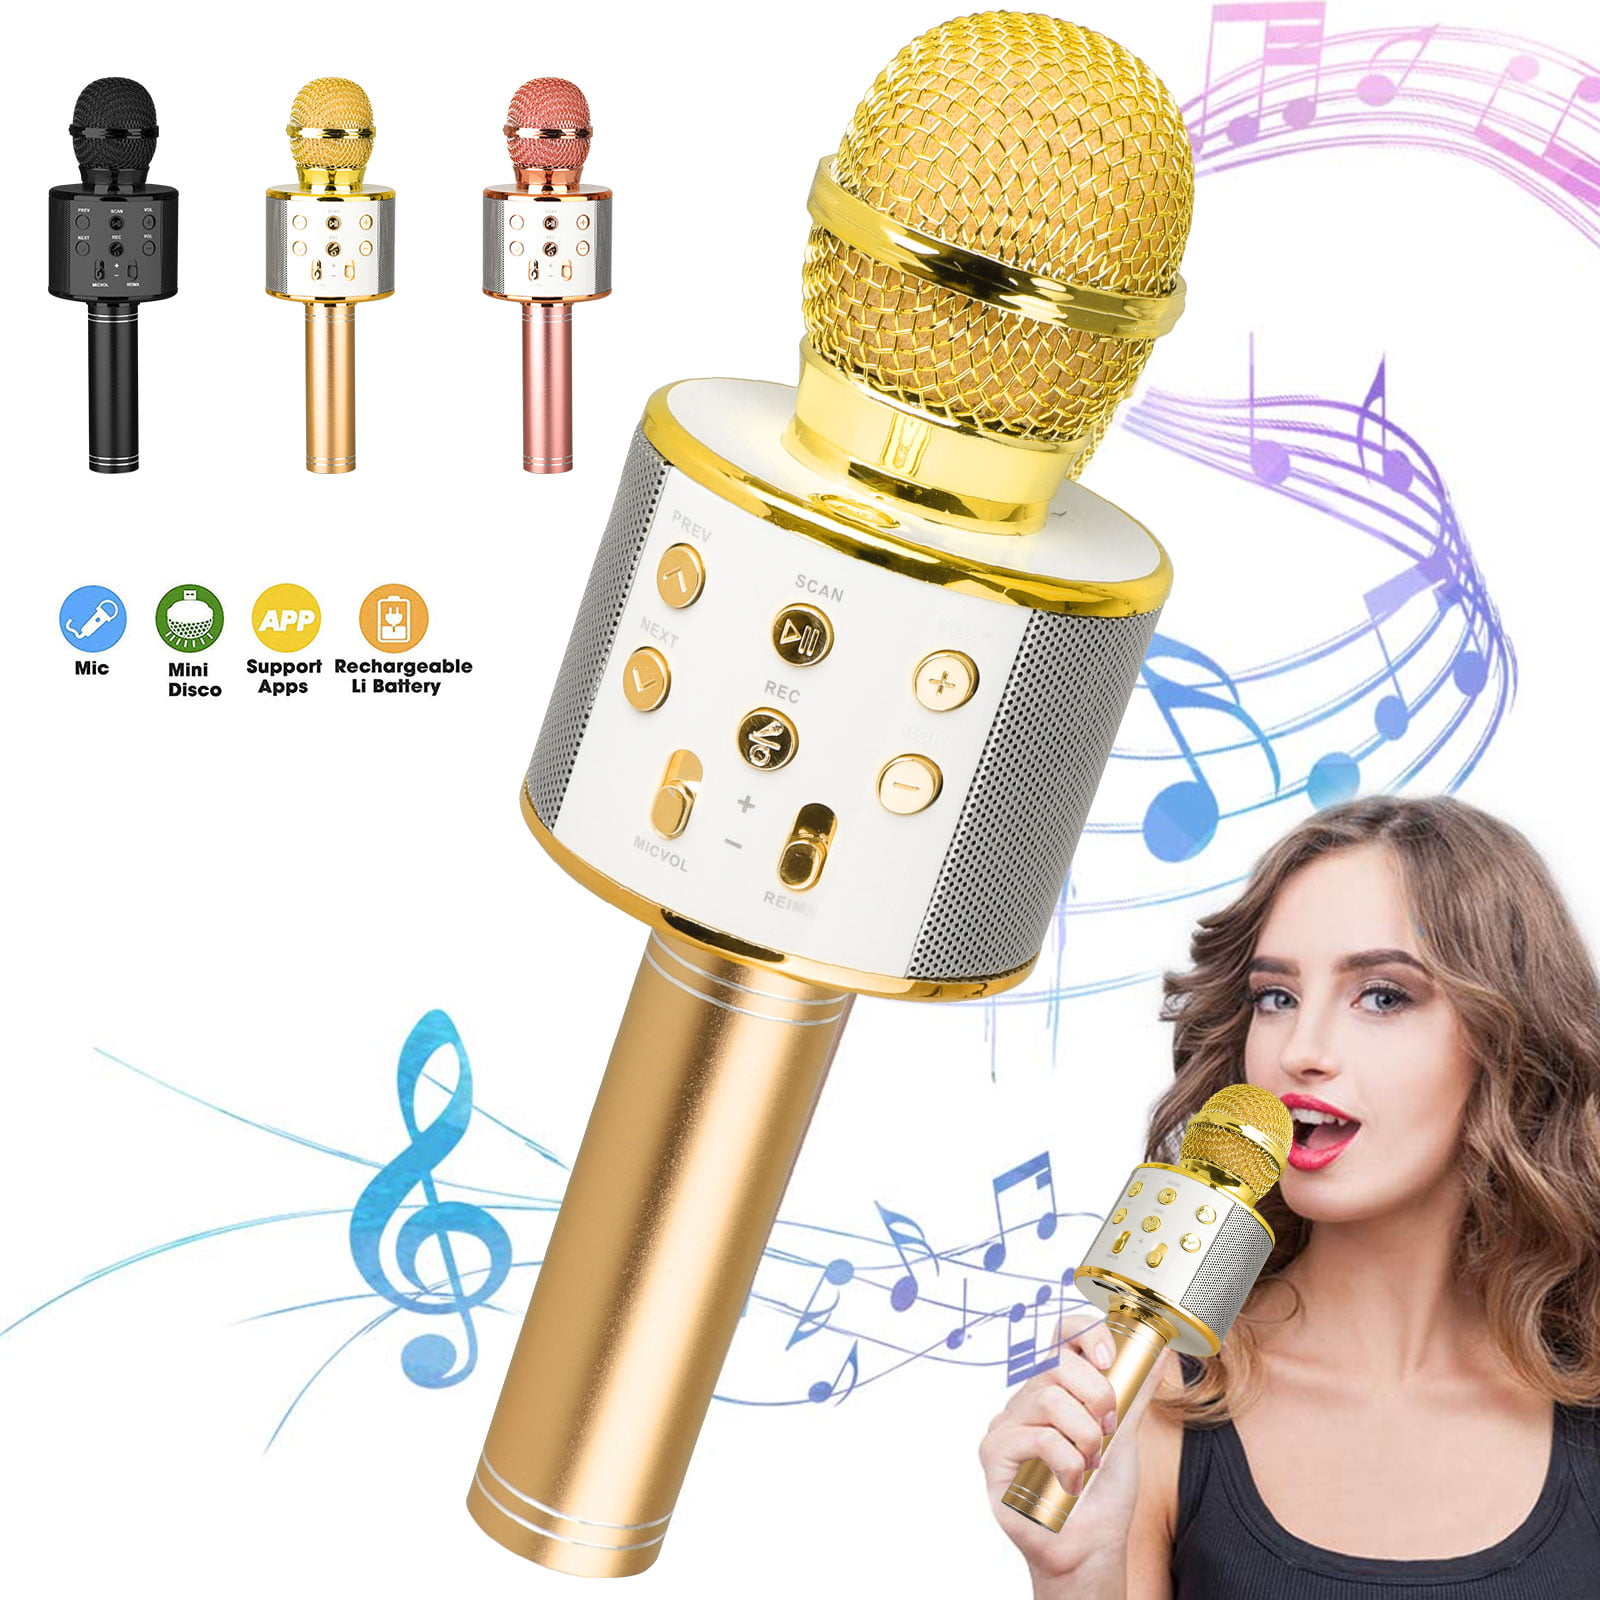 Wireless Bluetooth Karaoke Microphone,SYOSIN 4 in 1 Portable Handheld Karaoke Player Speaker for Android/iPhone/iPad/Sony/PC/Outdoor/Party 